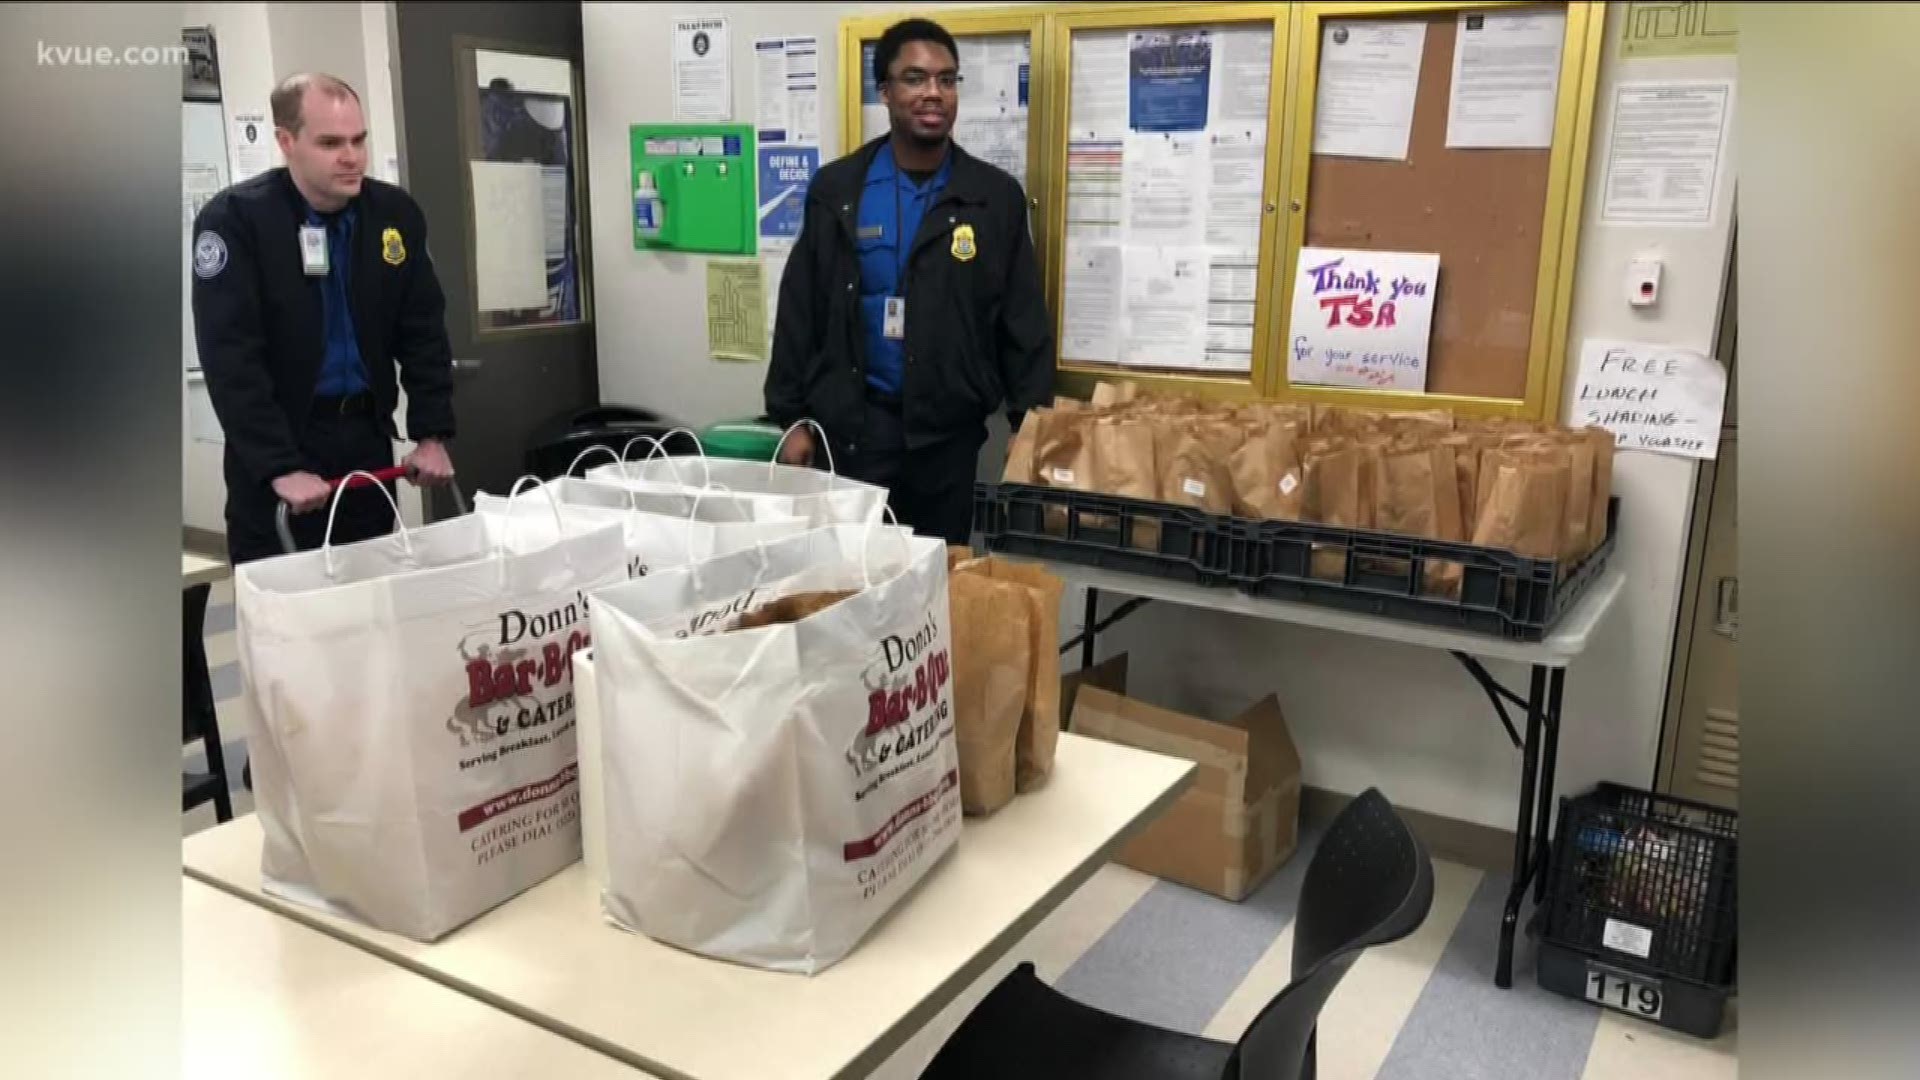 The Austin Police Association and APD officers who work at the airport teamed up with Don's BBQ to feed TSA employees who still haven't gotten paid this year.